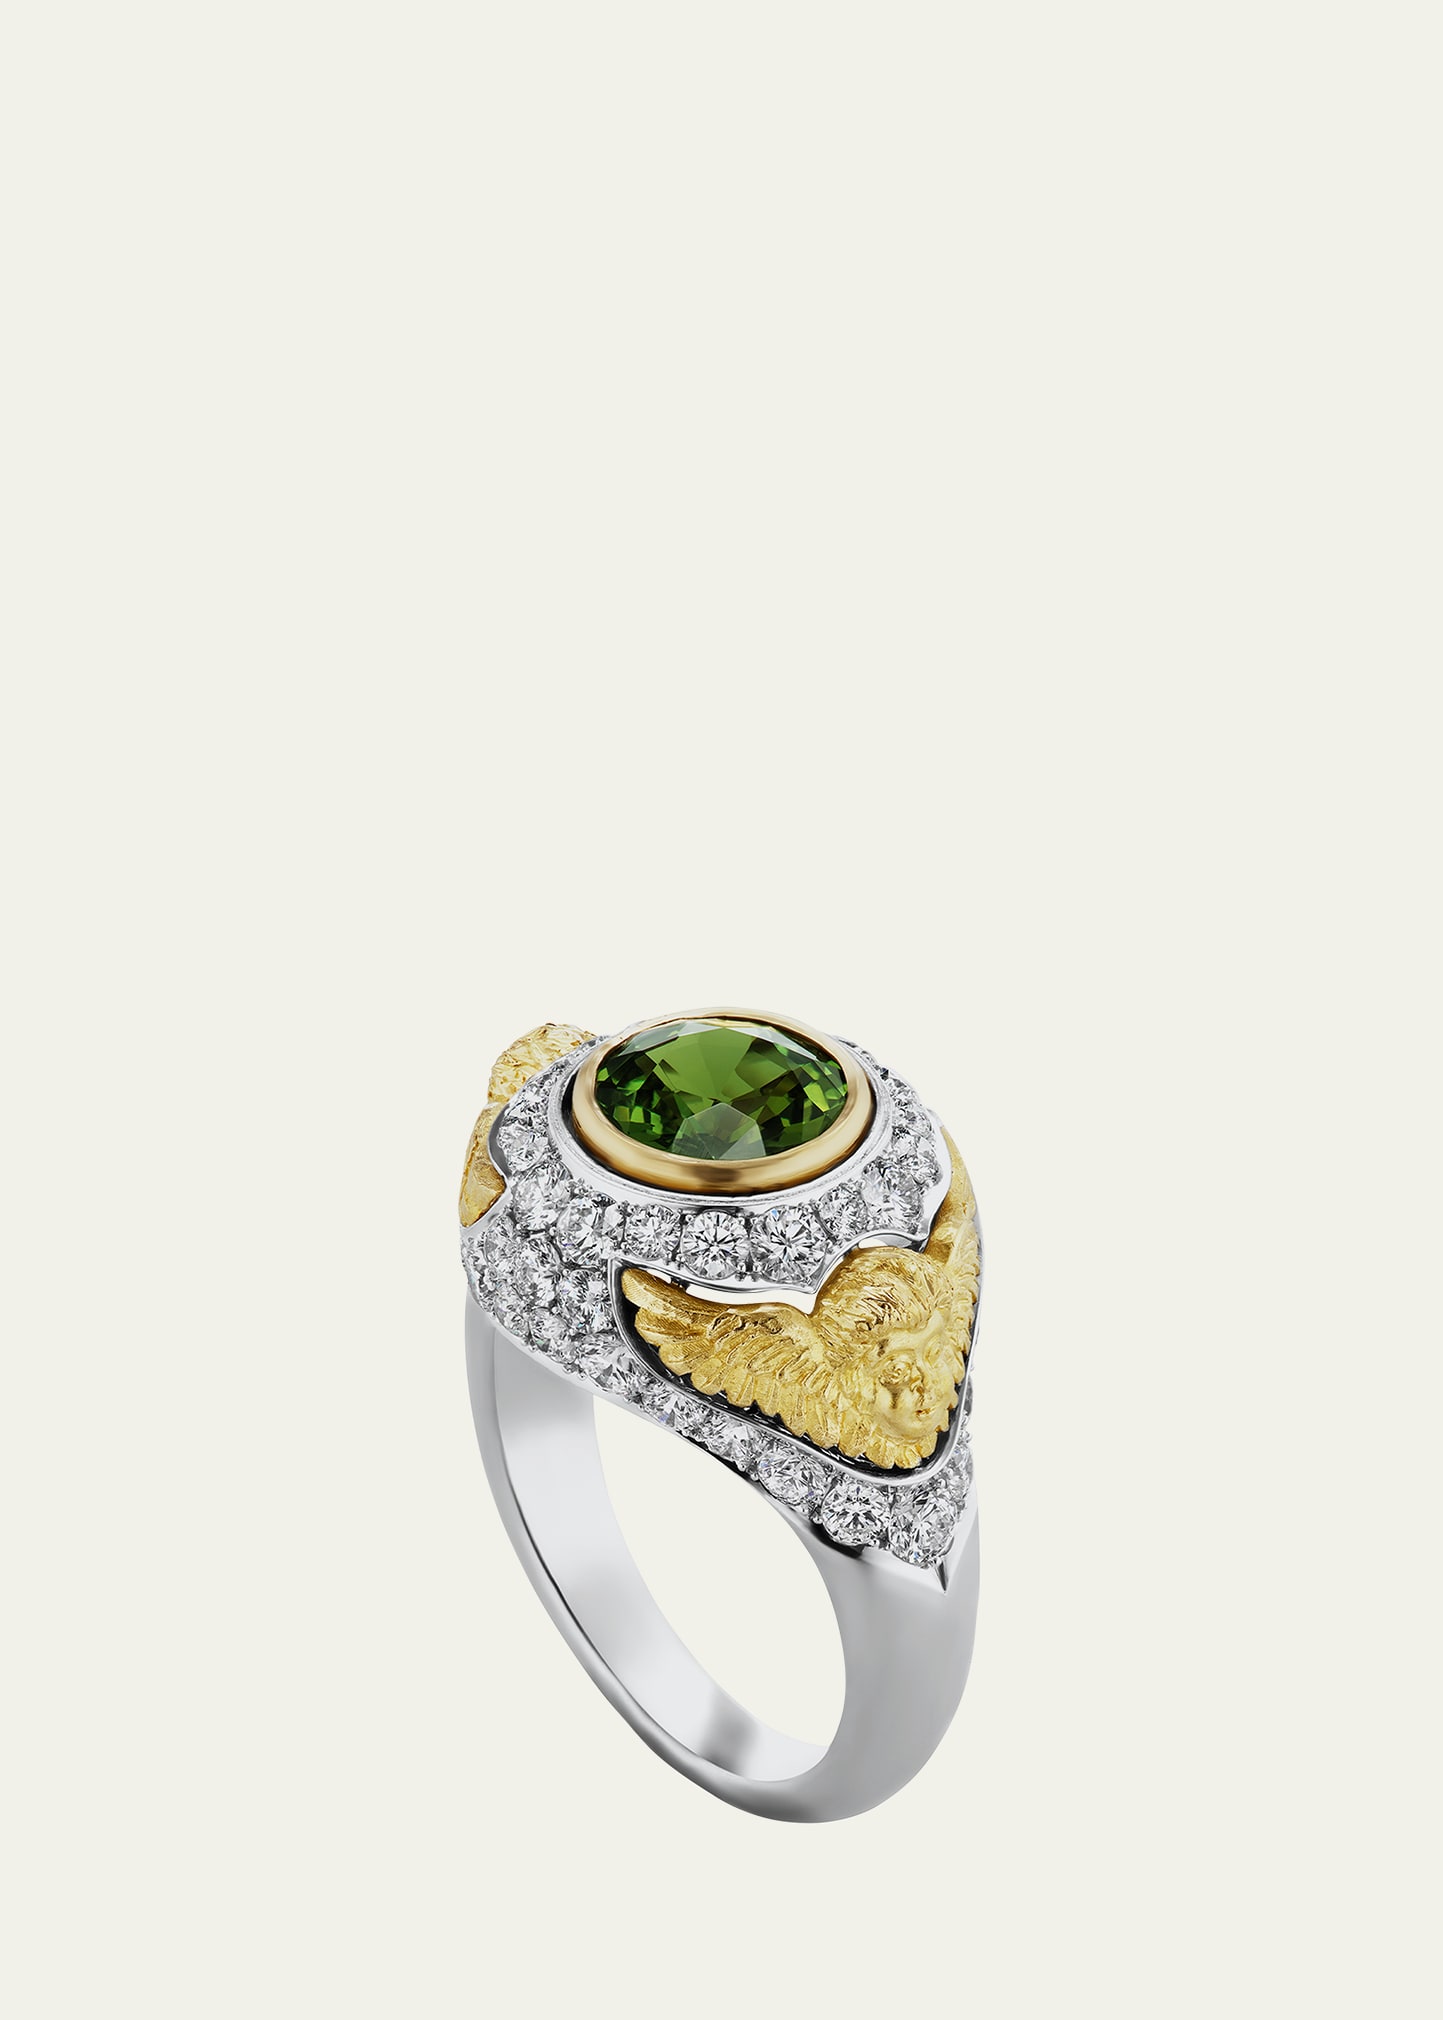 Anthony Lent Green Sapphire Pavé Putti Ring with Diamonds, Gold and Platinum